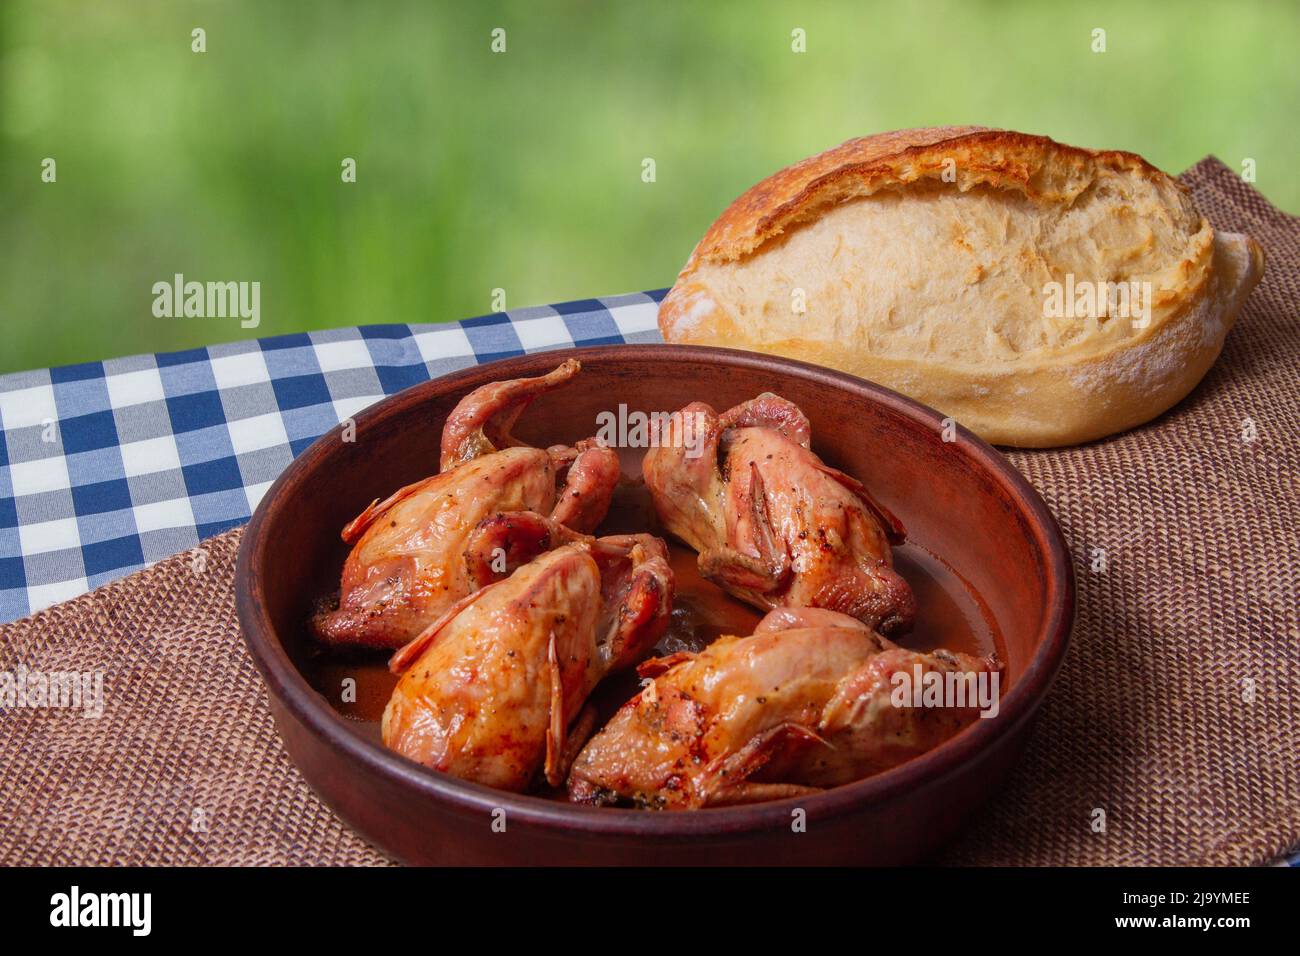 Roasted game birds and white bread with green outdoor background. Rustic table serving. Stock Photo